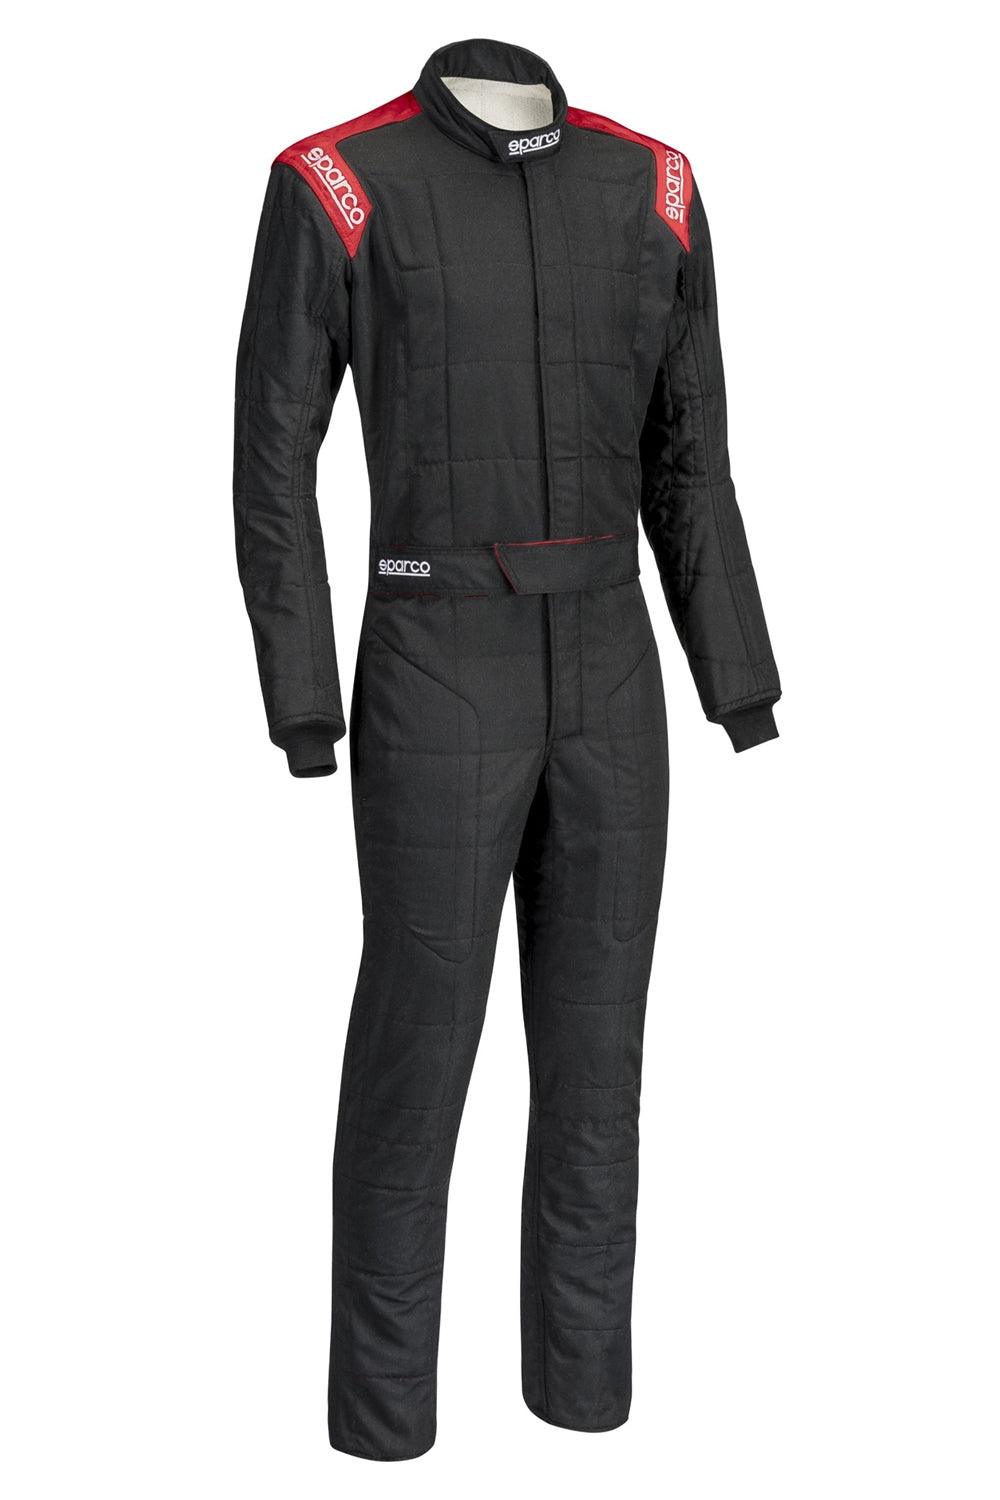 Suit Conquest Boot Cut Blk/Red X-Large - Burlile Performance Products